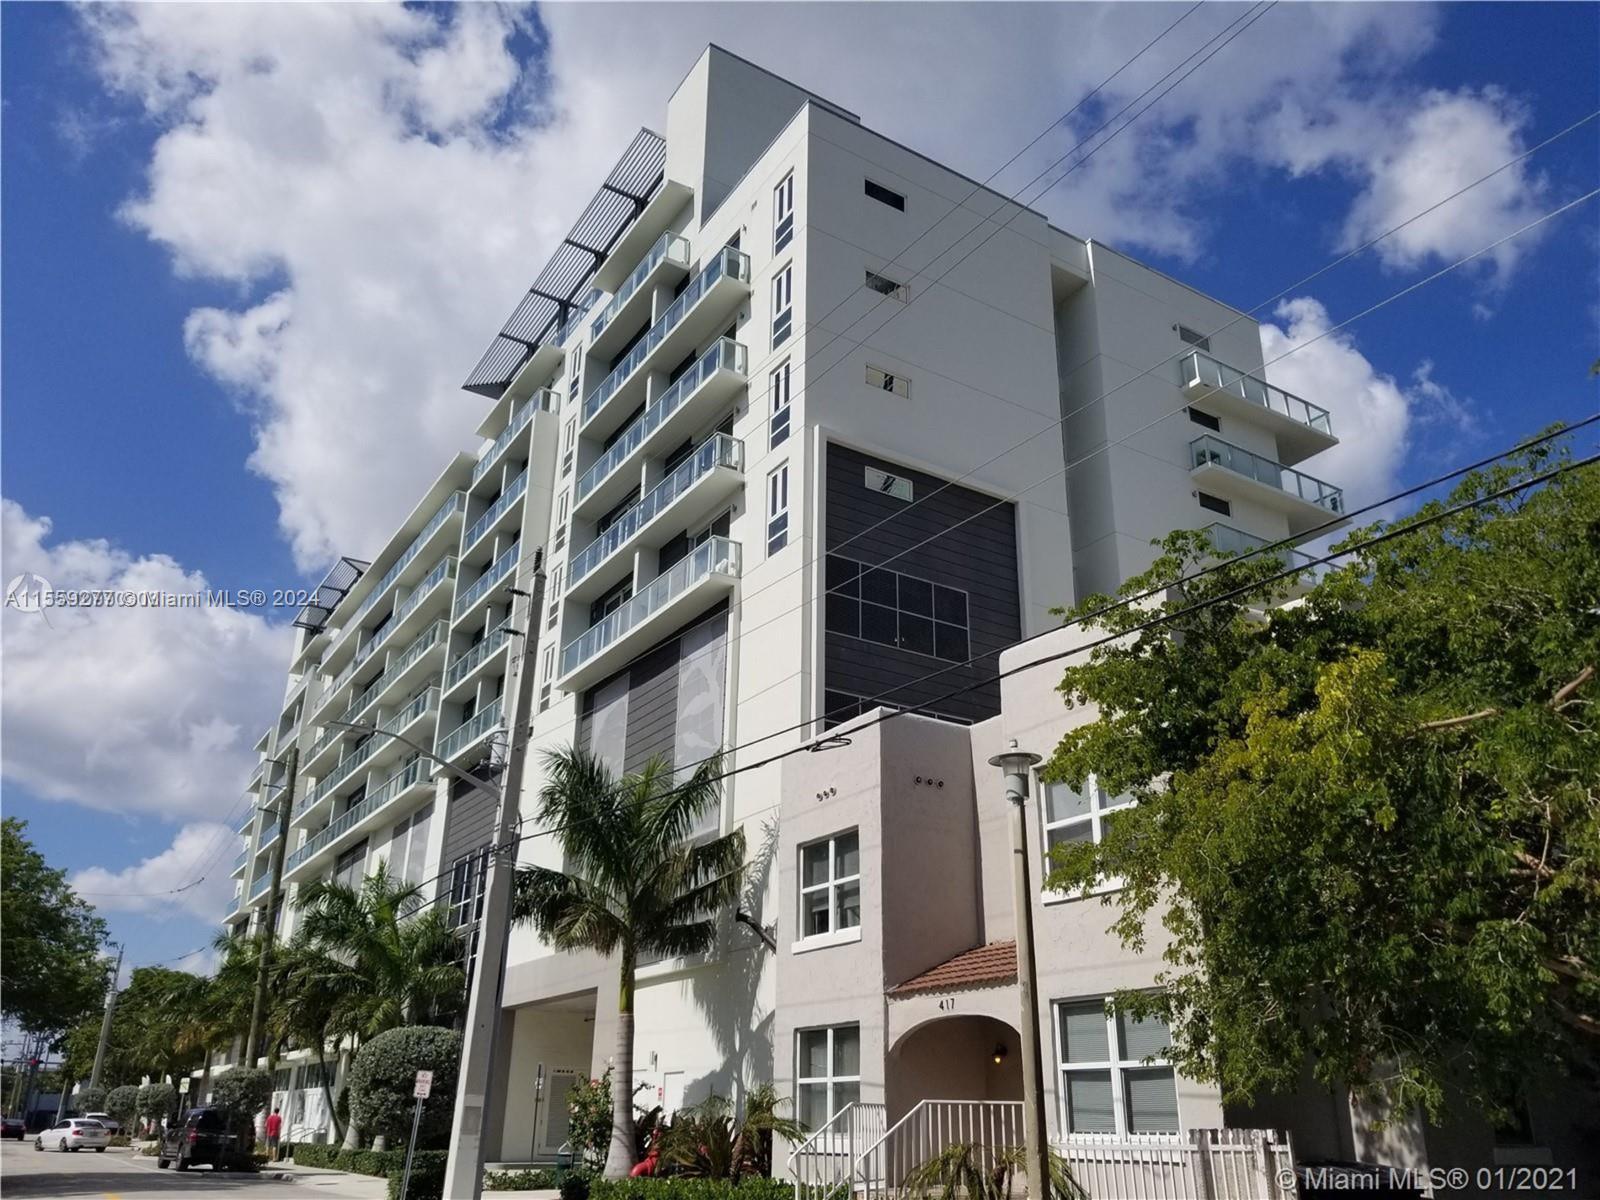 Great unit in 26 Edgewater, boutique building located in the heart of Edgewater near several locations in the city. This one-bedroom unit available in Biscayne corridor, presents an incredible opportunity to live in the heart of Miami with several amenities including a rooftop pool, lounge area, sun deck, fitness center and party room. Impeccable conditions, stainless steel appliances just for you!.